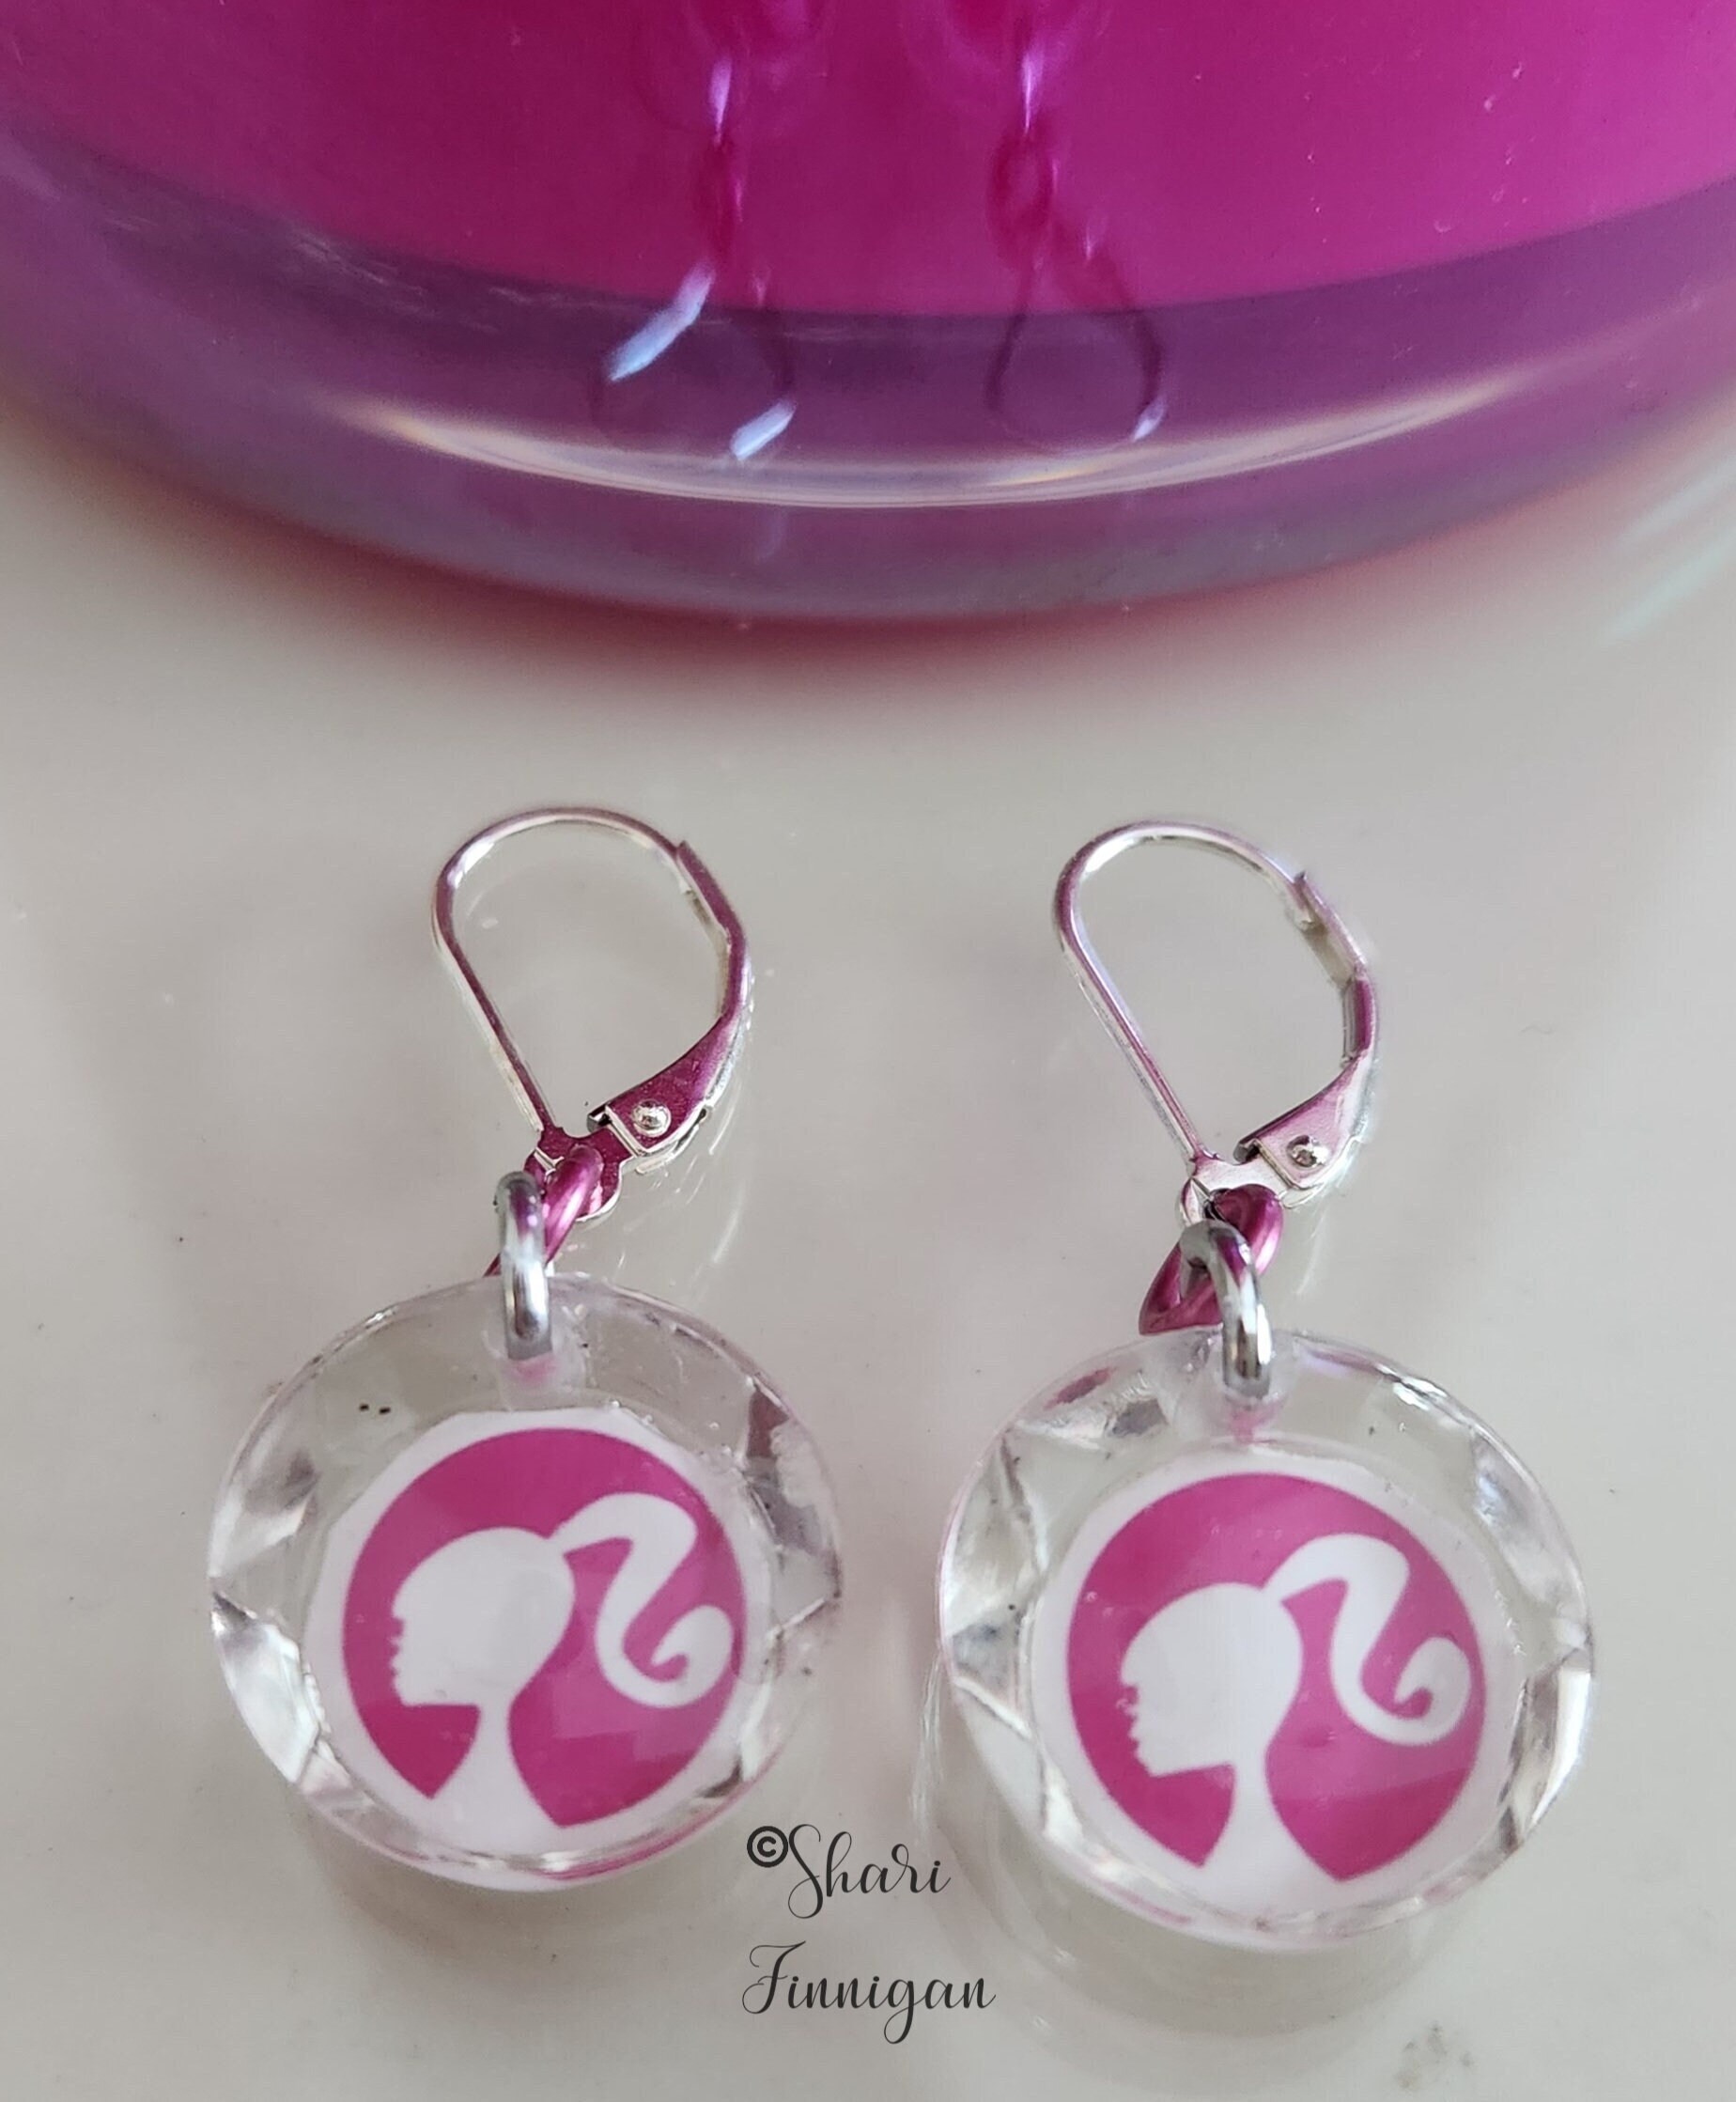 Colourful toy earrings | Lorelai Le Quilliec